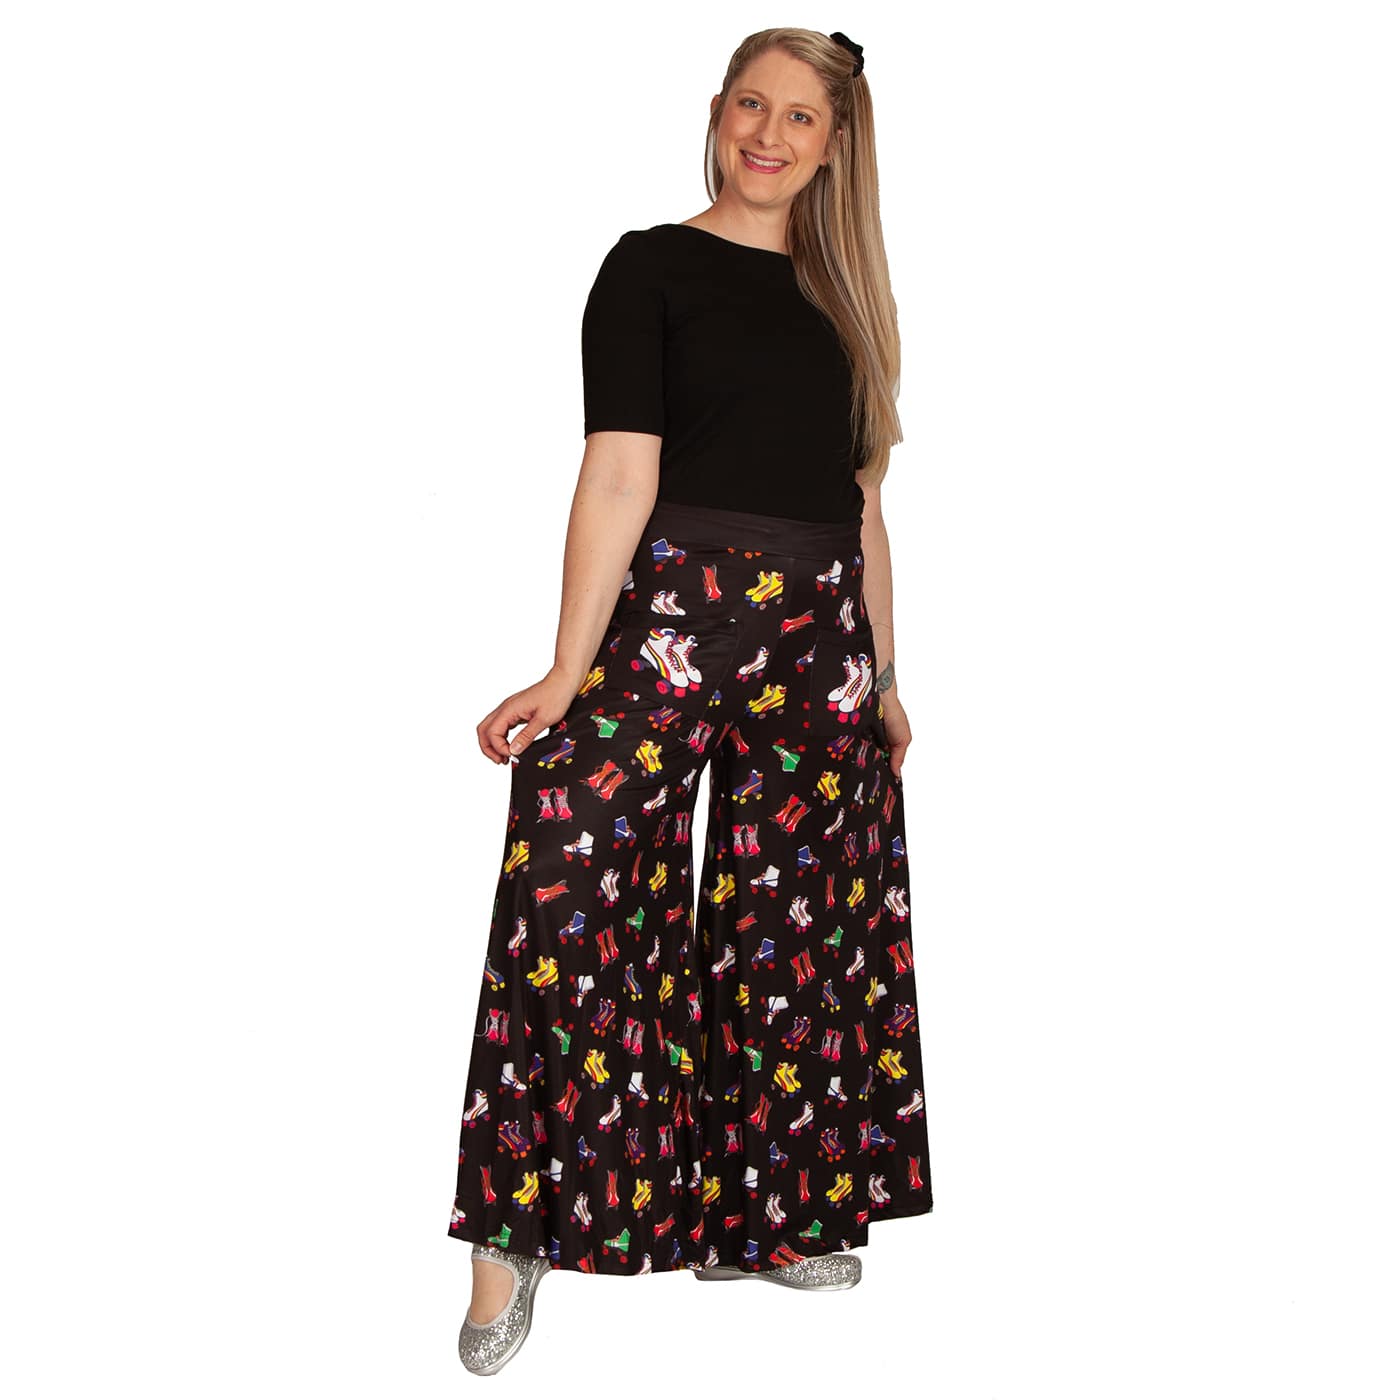 Retro Skates Wide Leg Pants by RainbowsAndFairies.com.au (Roller Skates - Roller Derby - Pants With Pockets - Pallzao Pants - Flares - Bell Bottoms) - SKU: CL_WIDEL_RETRO_ORG - Pic-03